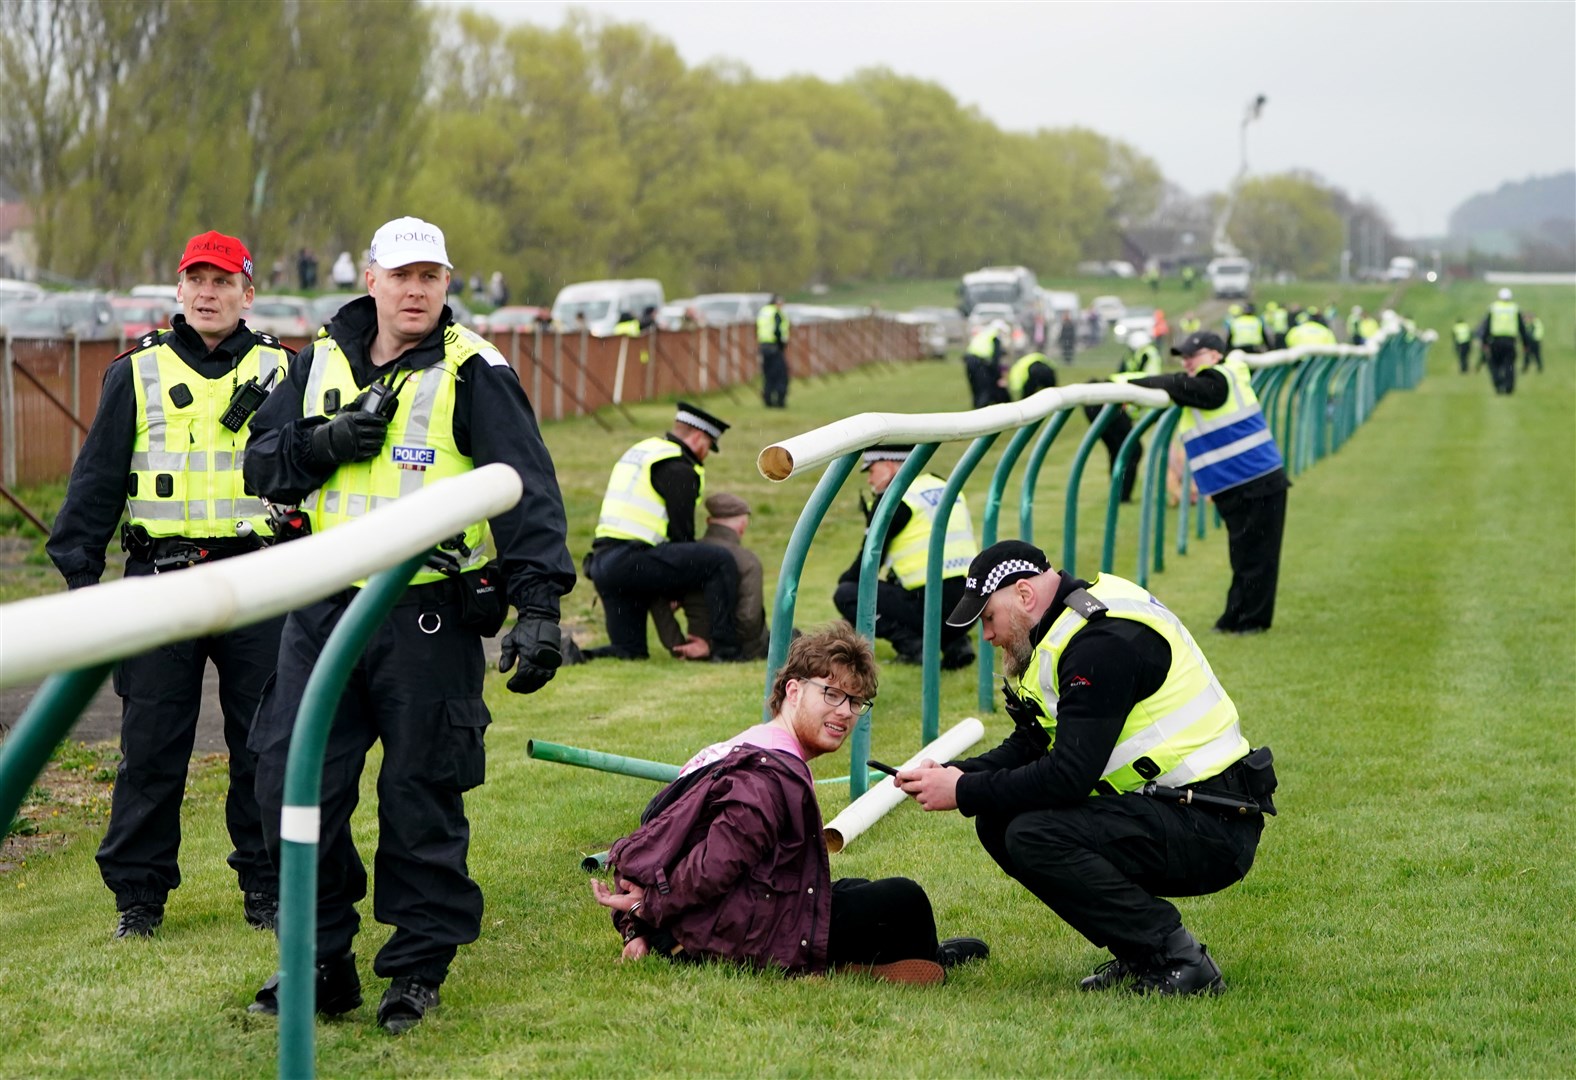 Animal Rising activists are apprehended by police officers as they attempted to invade the racecourse (Jane Barlow/PA)